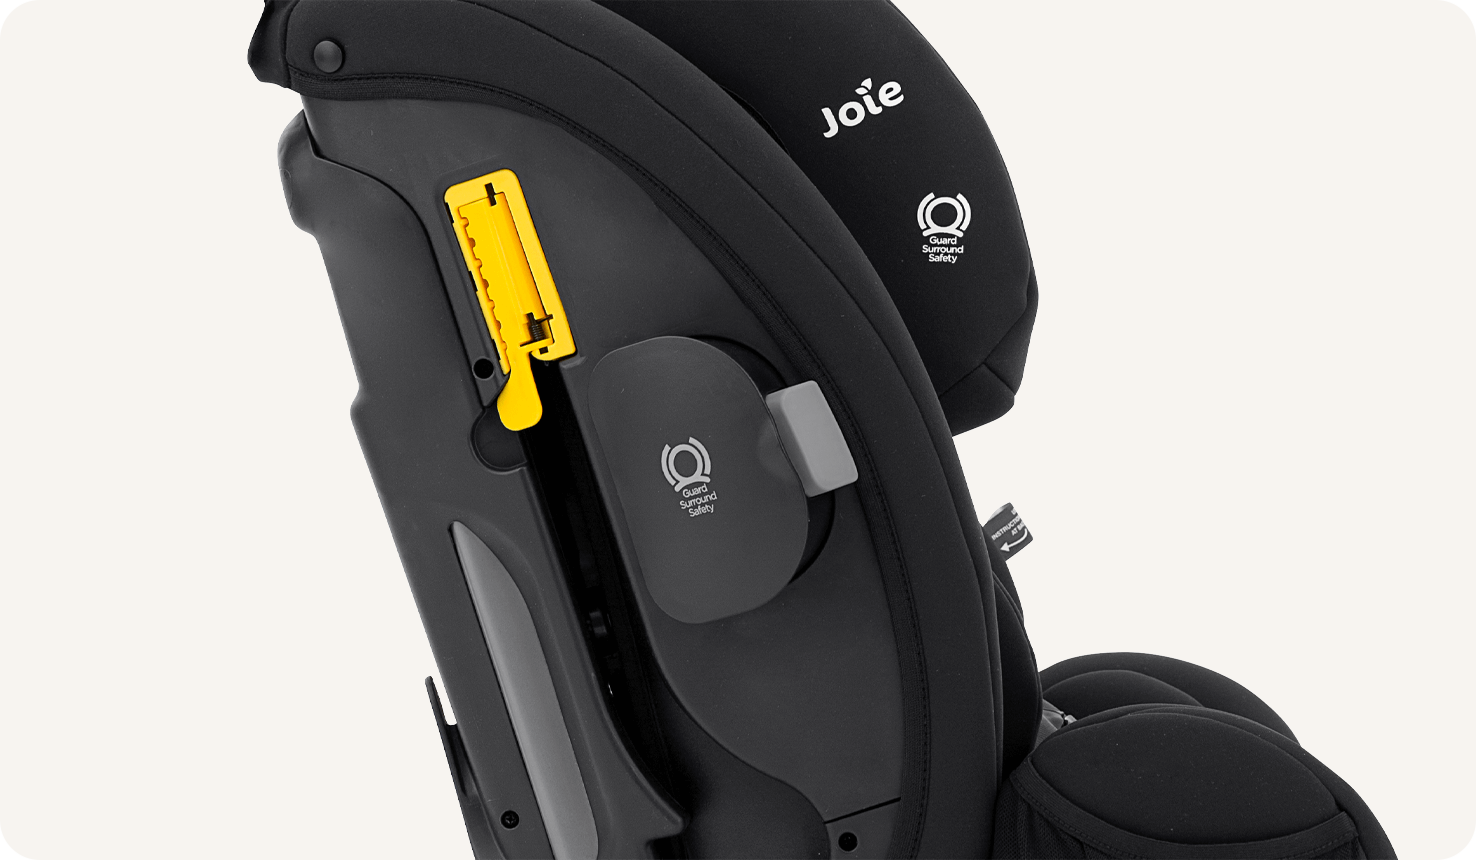 Joie armour fx car seat in black from the right profile view with headrest fully lowered zoomed in on the yellow seatbelt path.